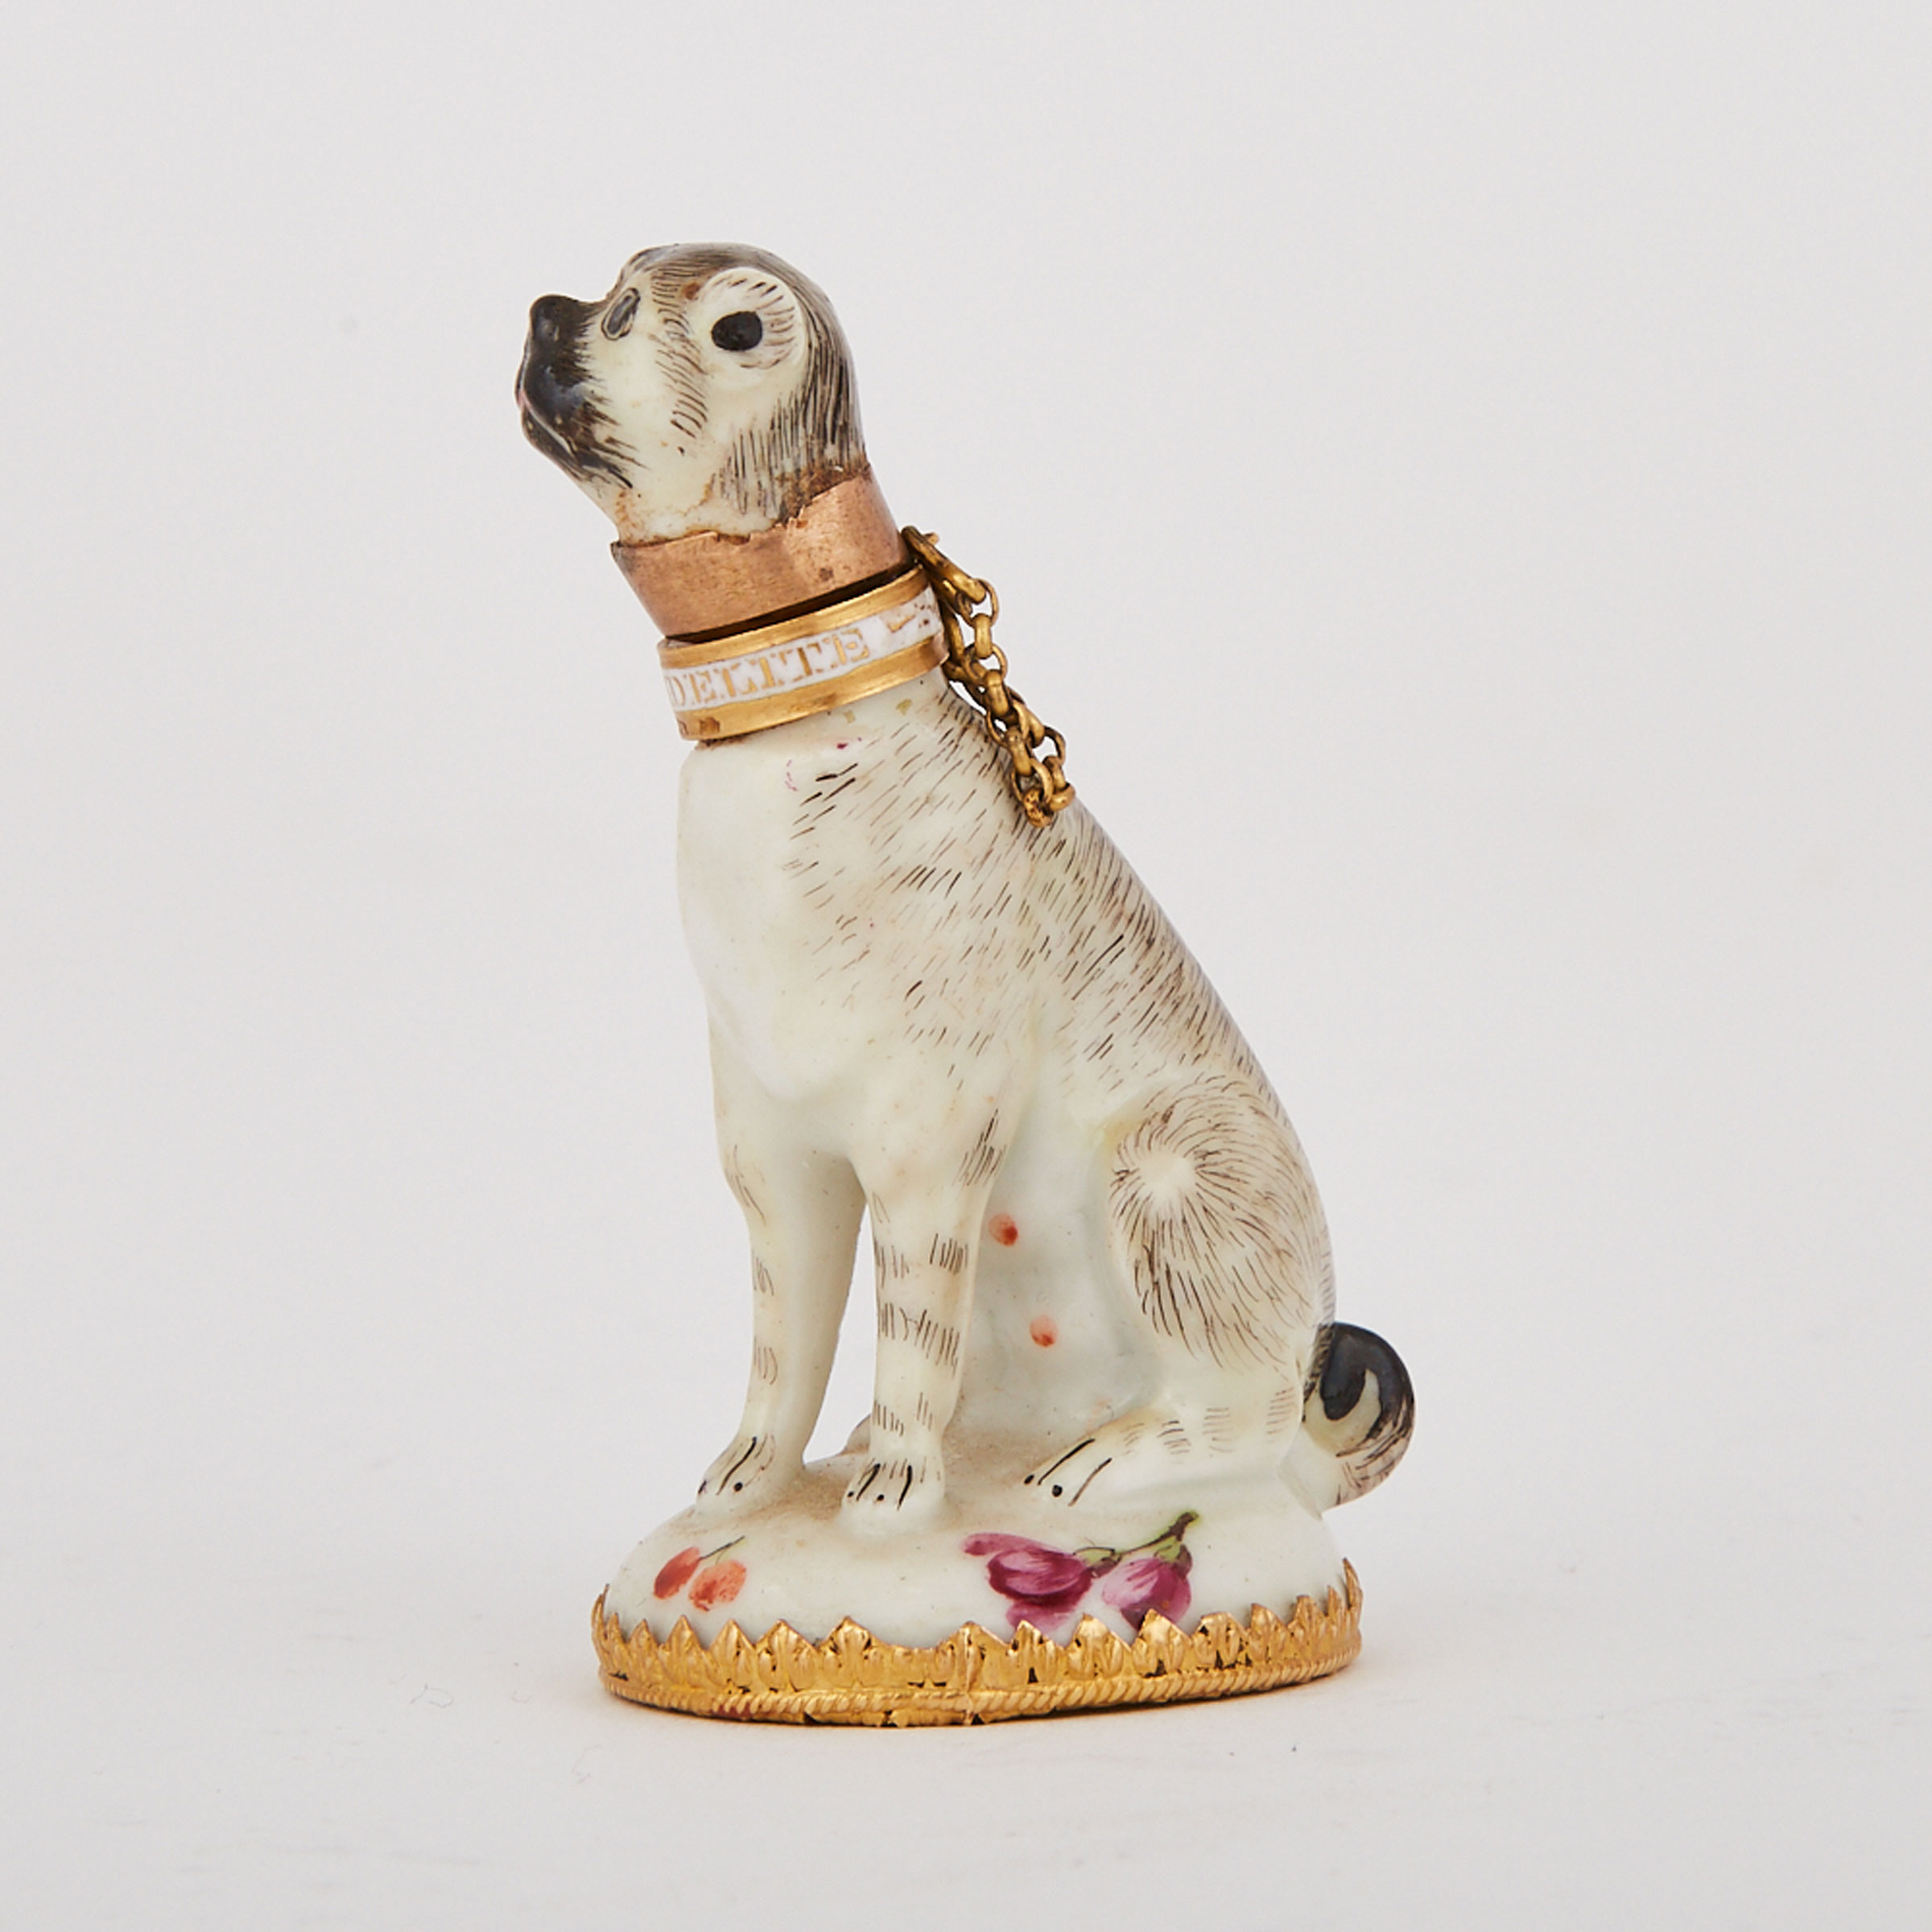 English Porcelain Seated Dog Scent Bottle, possibly Chelsea, c.1755